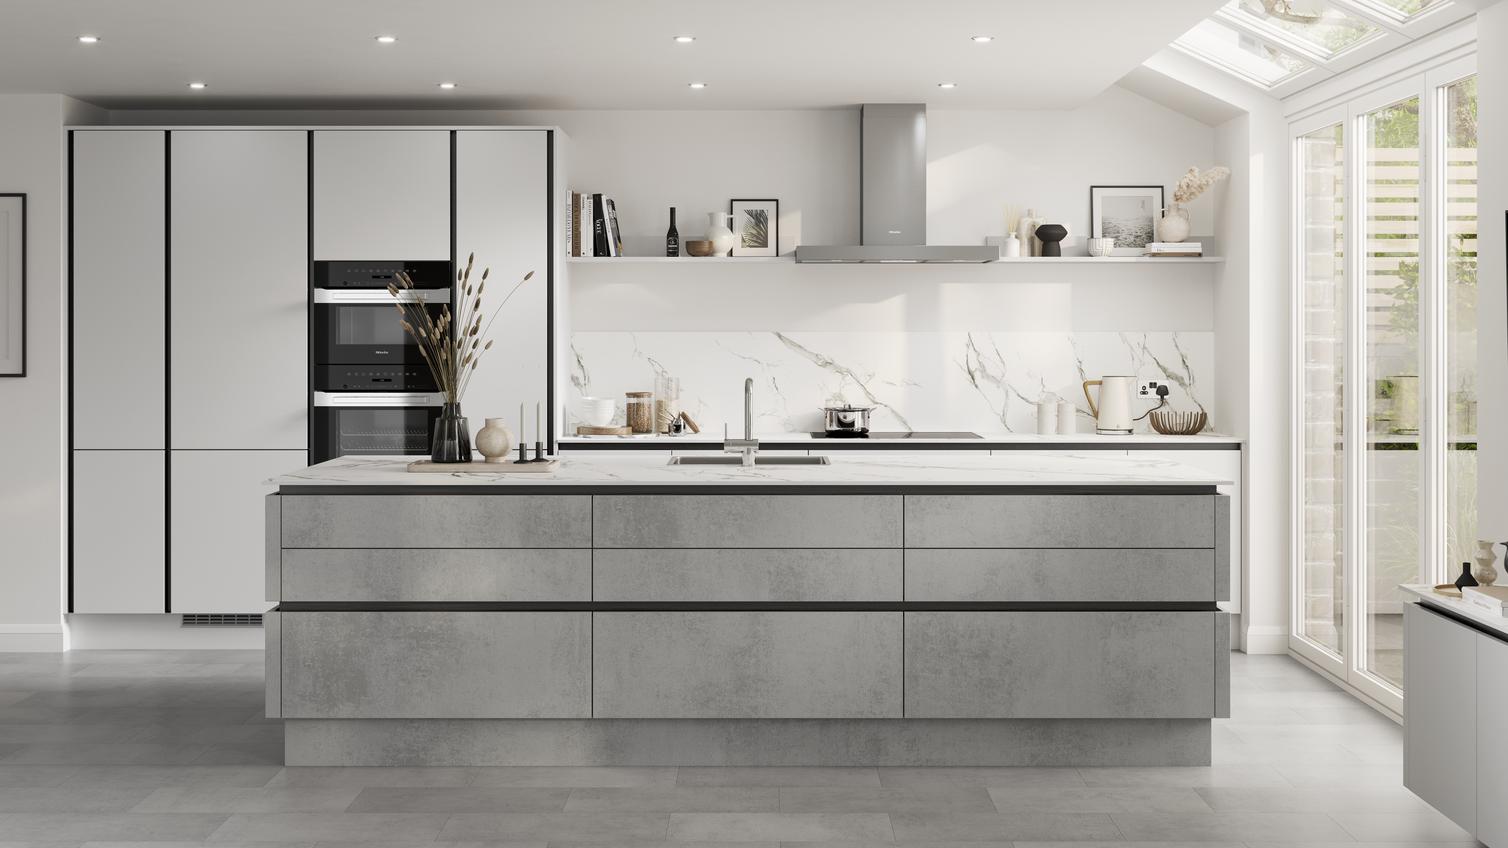 Open-plan kitchen with island and handleless concrete-effect doors. Contains matt-black metal trims for an industrious look.